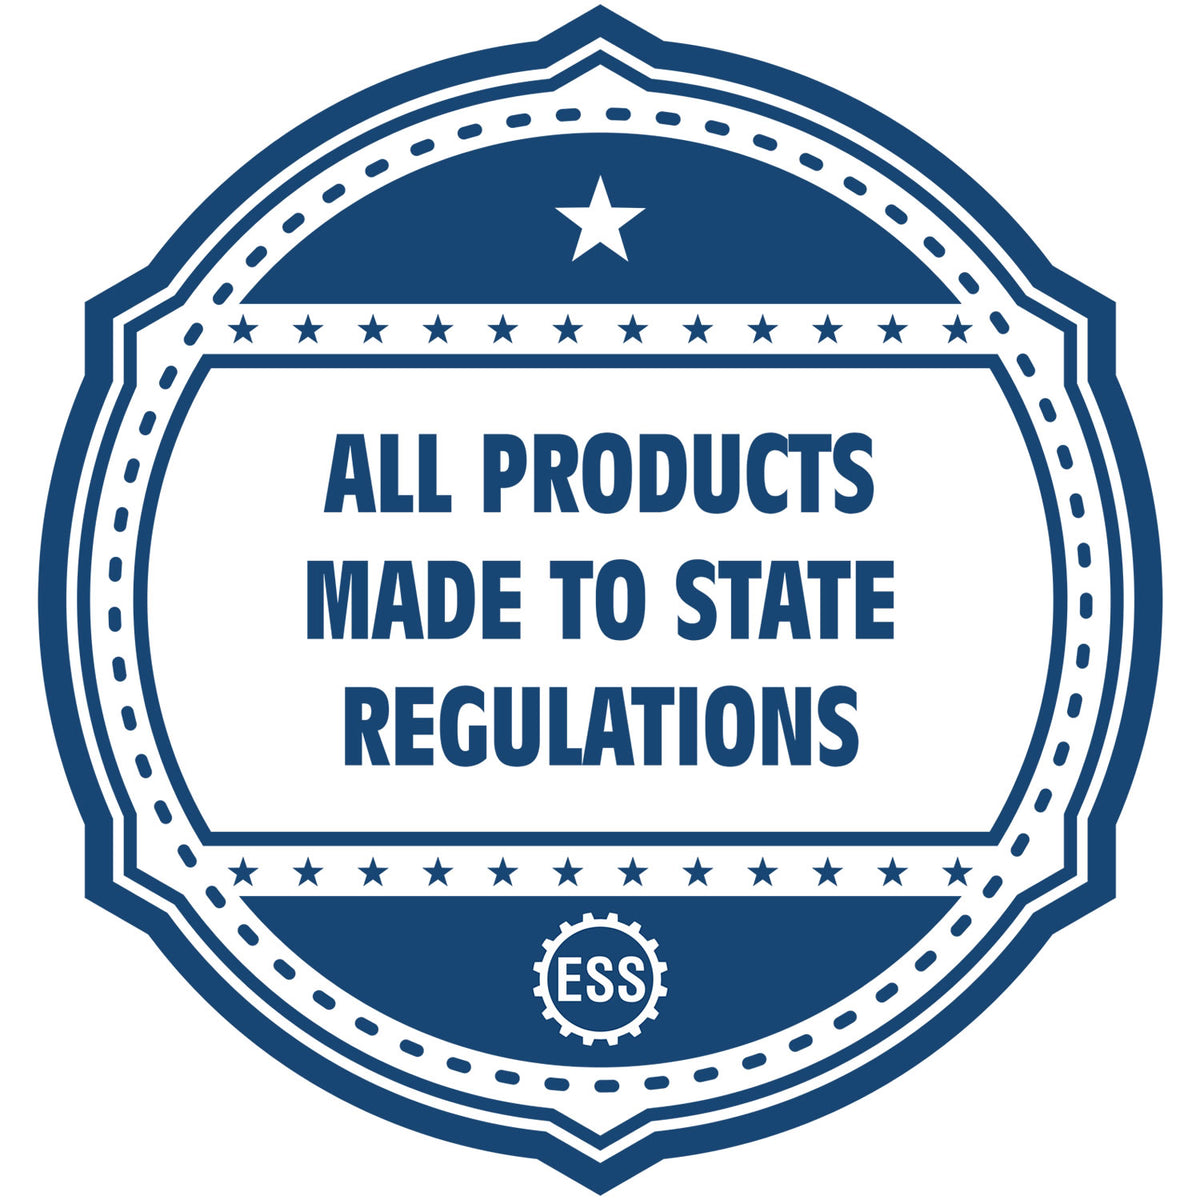 An icon or badge element for the Premium MaxLight Pre-Inked Alaska Engineering Stamp showing that this product is made in compliance with state regulations.